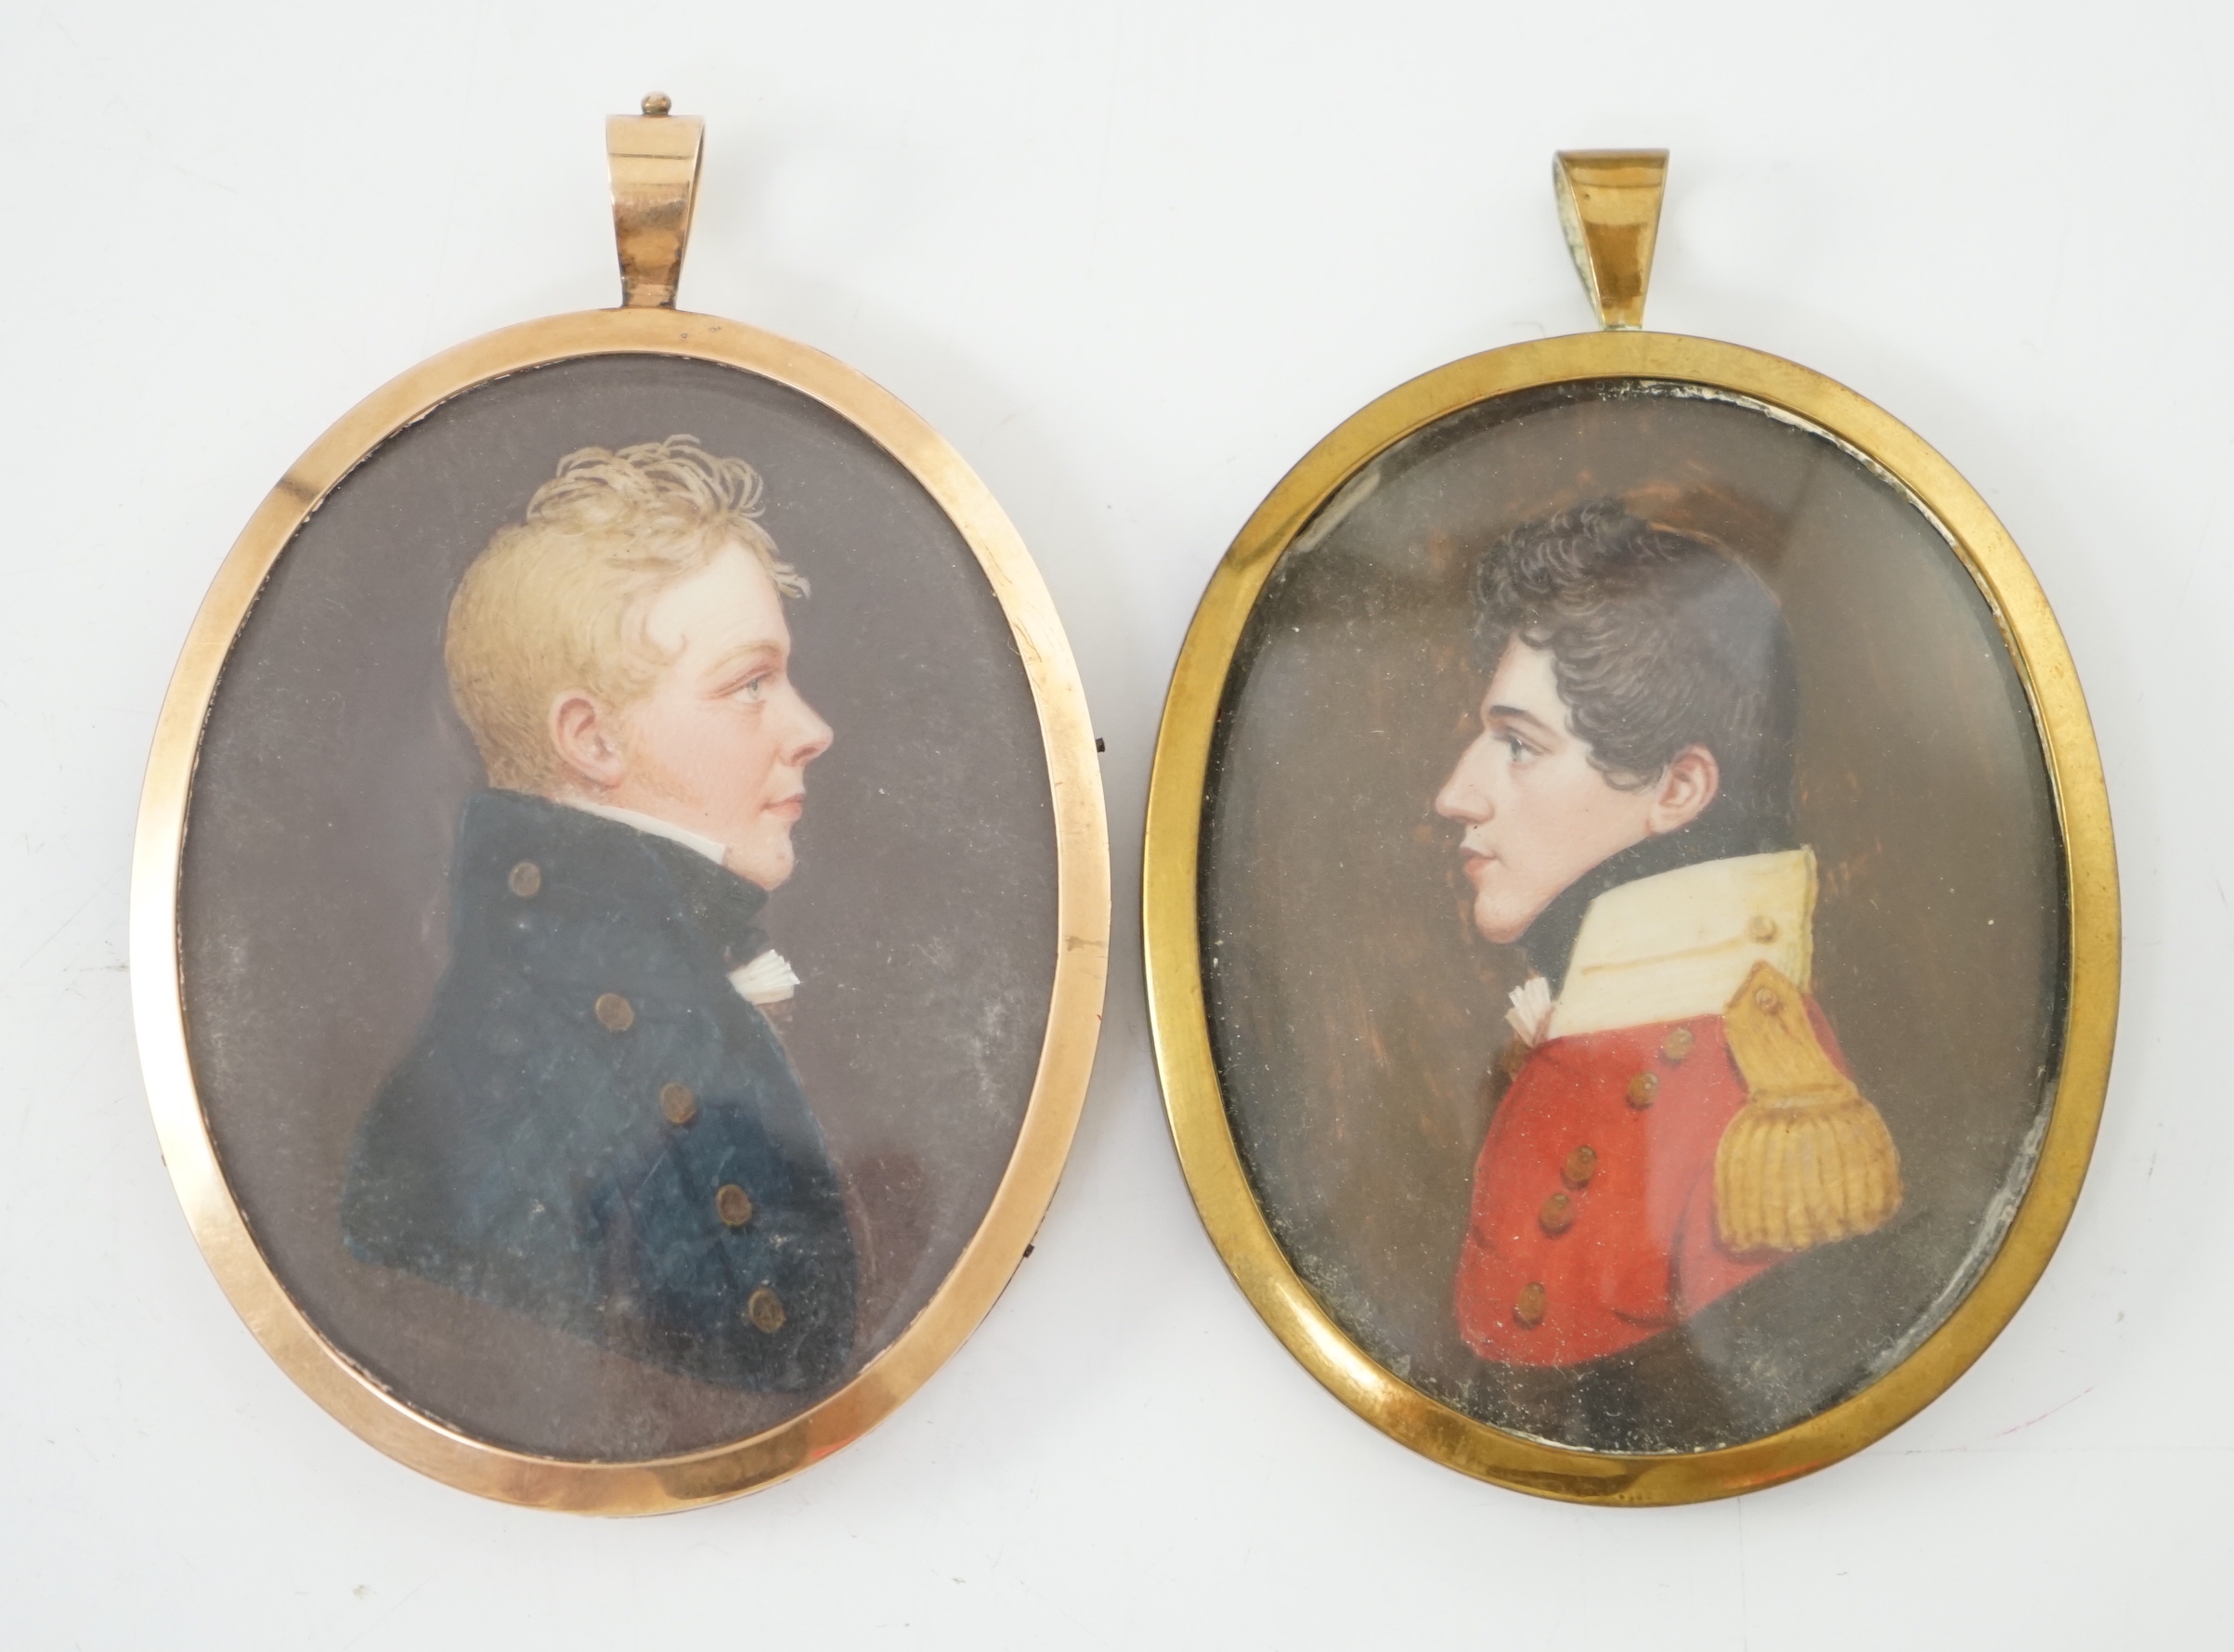 Mrs Anna Trewinnard (fl.1797-1806), Portrait miniatures of two army officers, watercolour on ivory, 6.5 x 5.3cm. & 6.8 x 5.4cm. CITES Submission reference TQRJHQEF